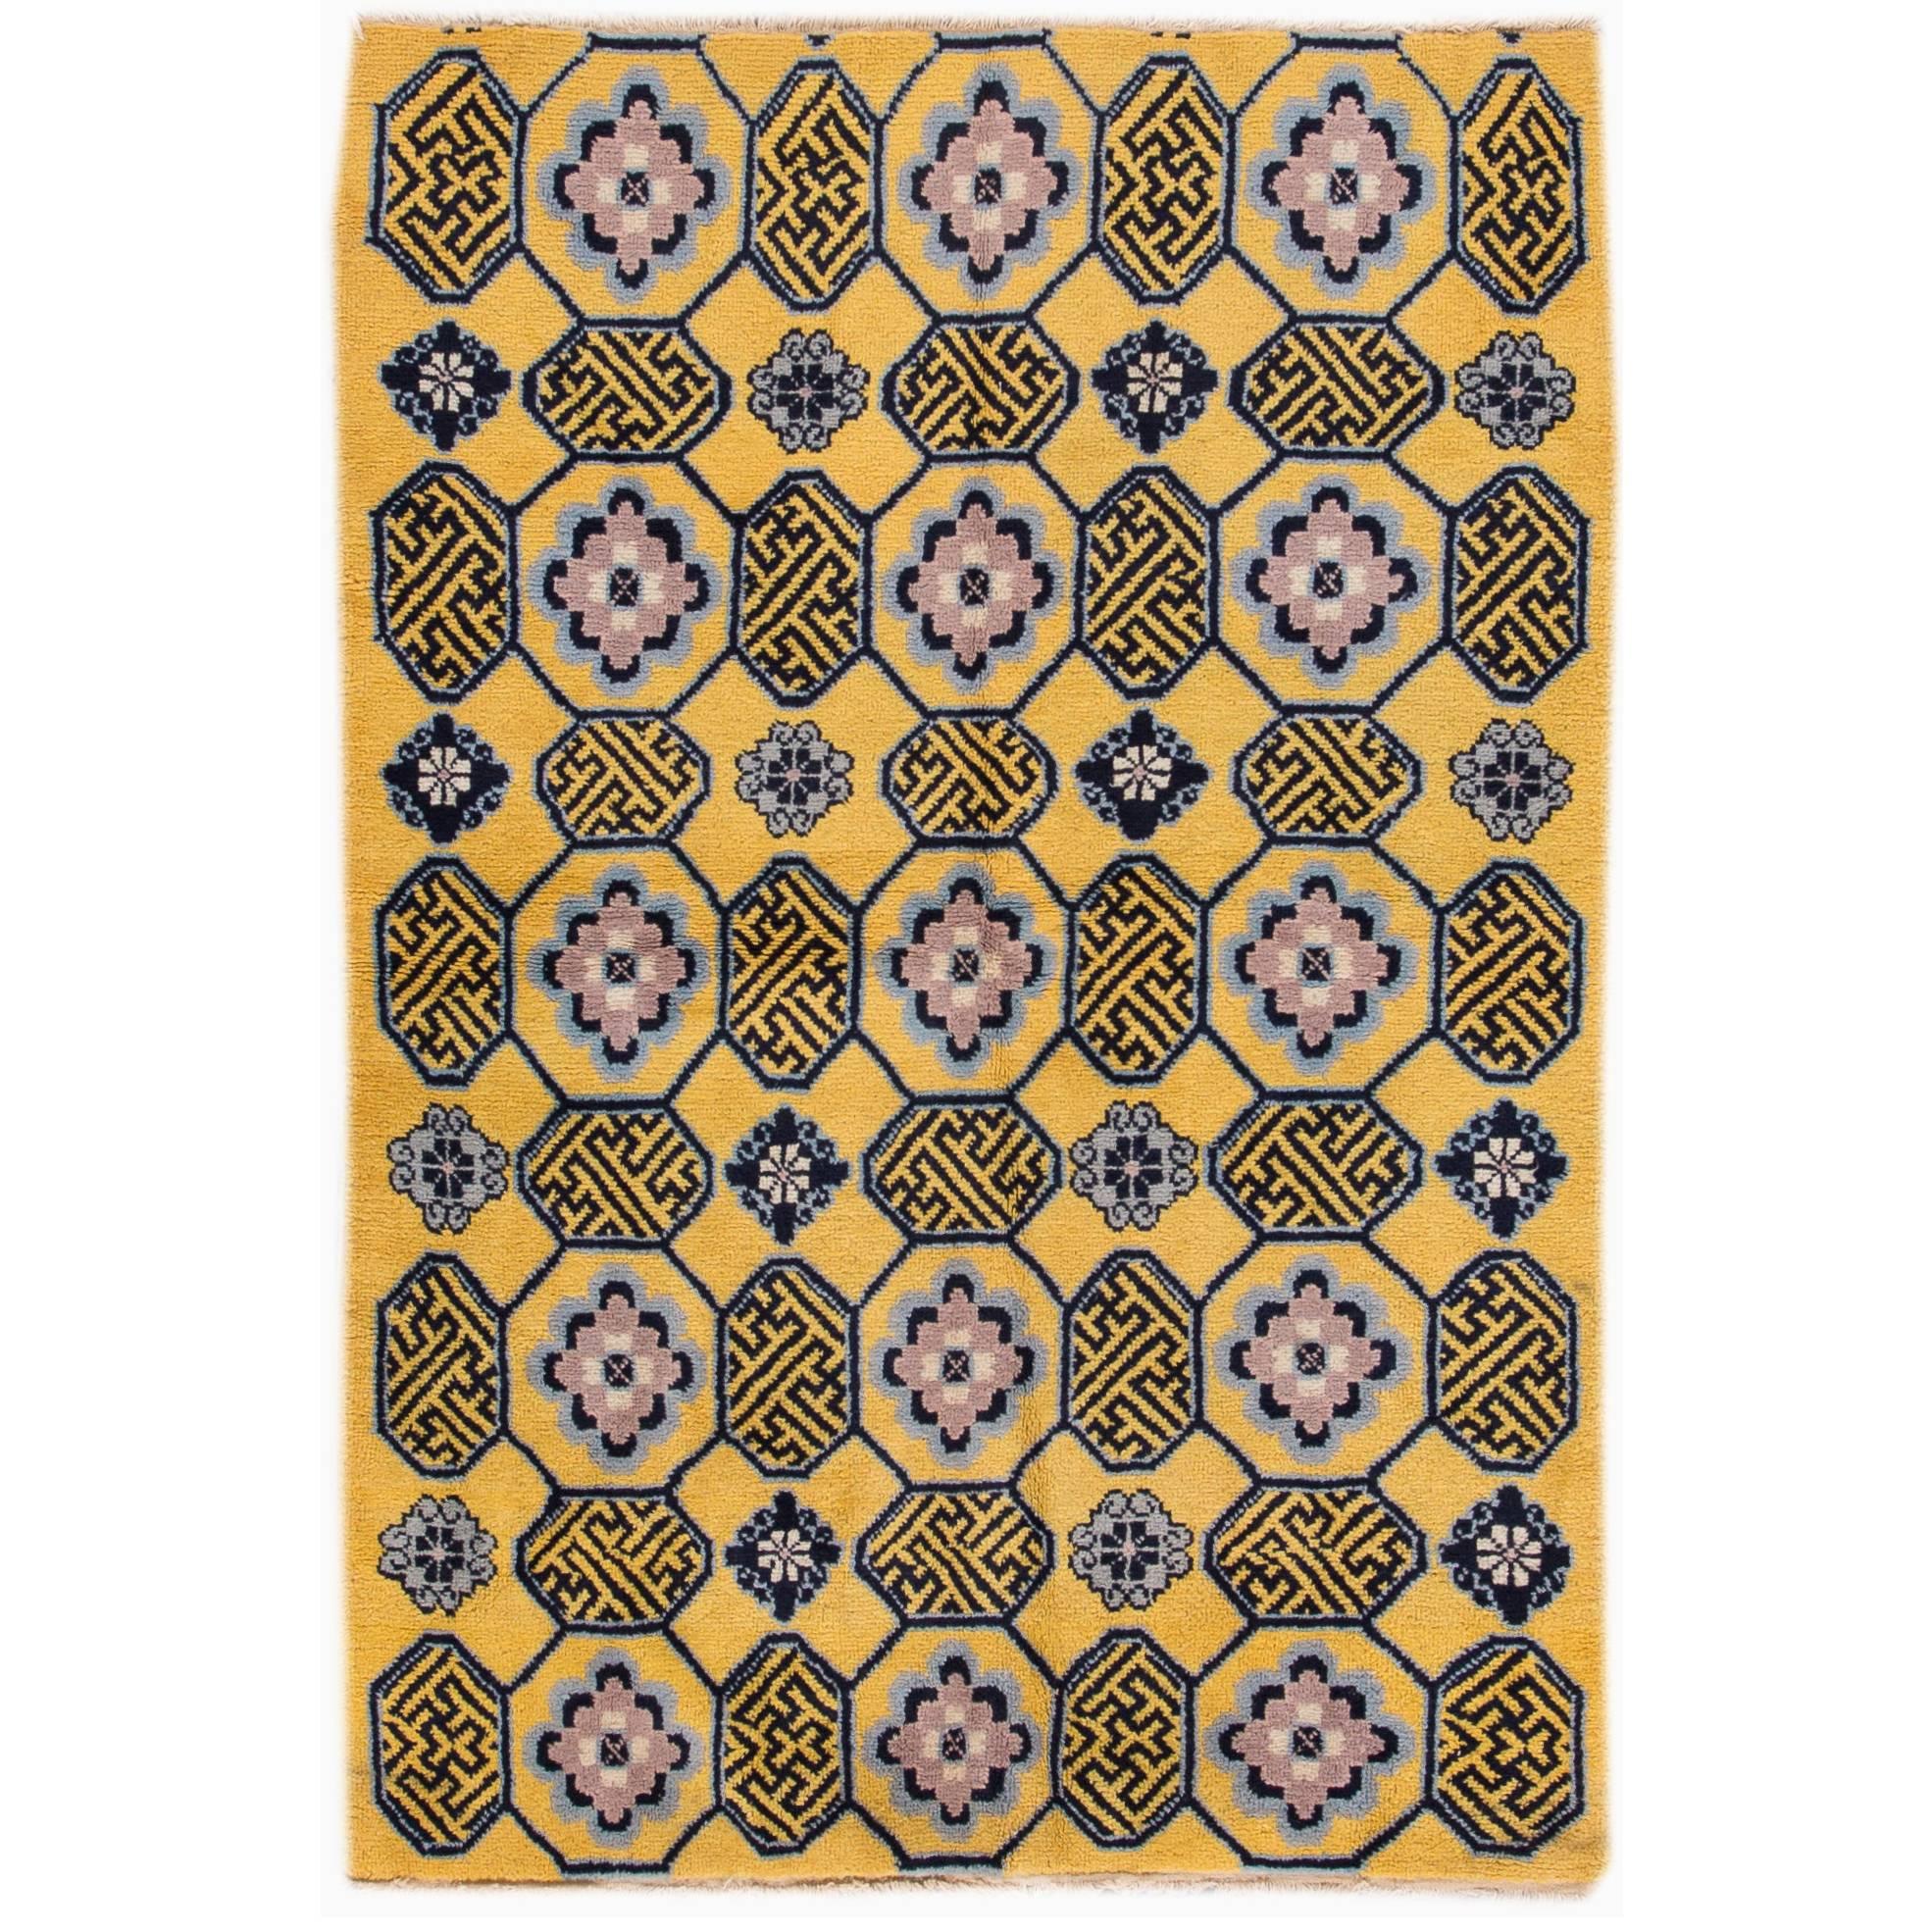 Vintage 1950s Yellow, Blue Chinese Carpet